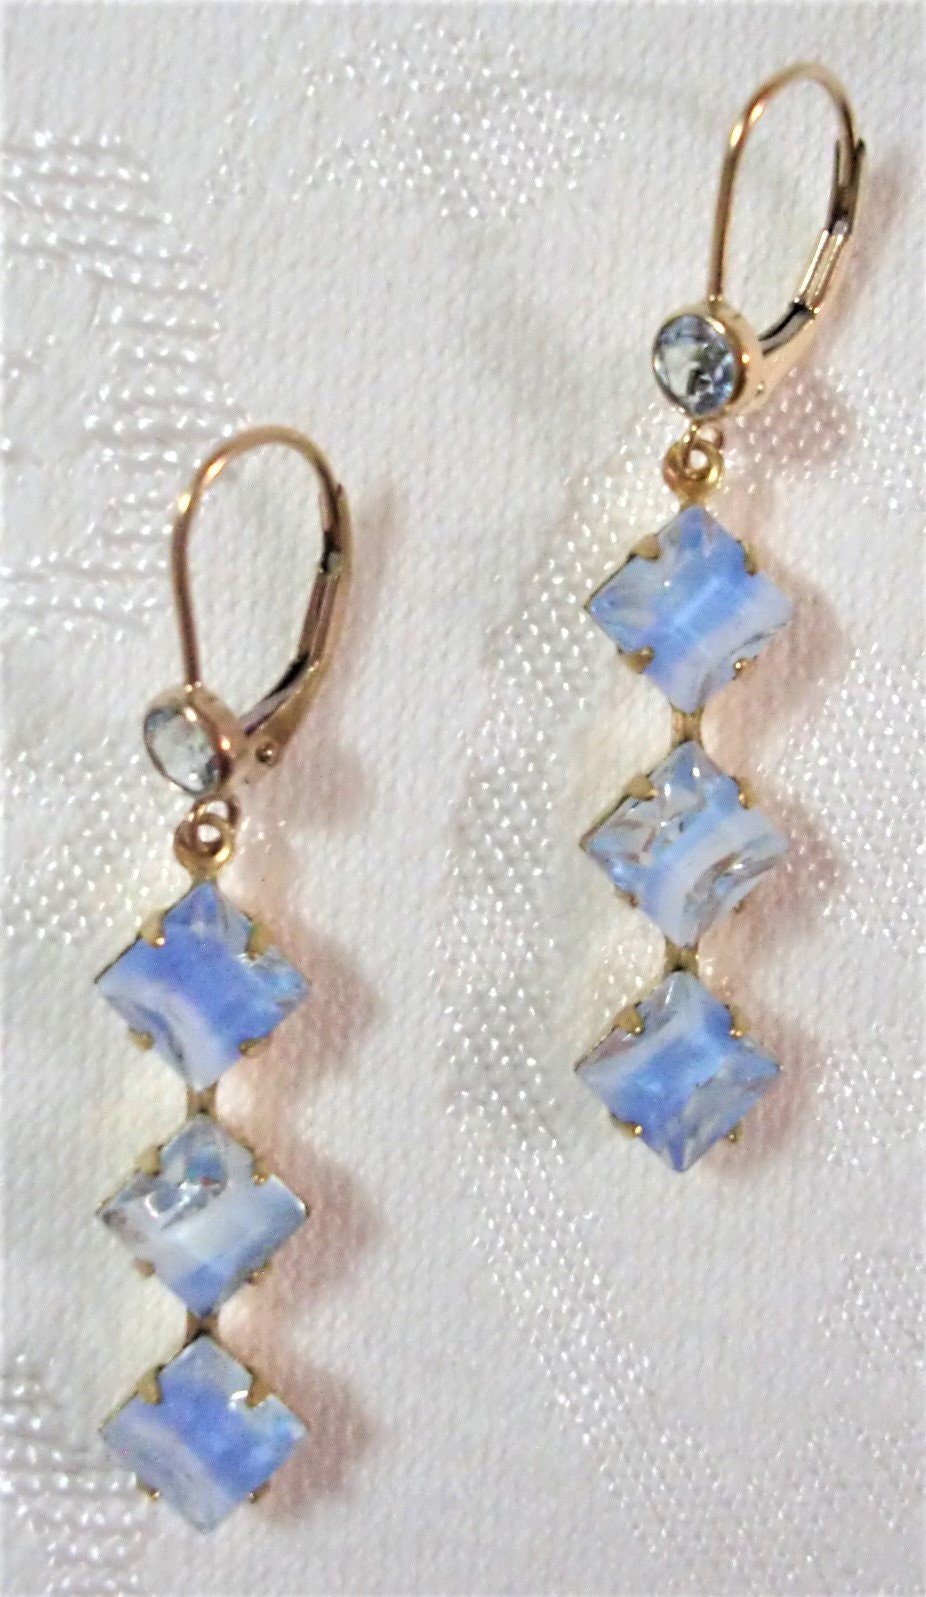 Earrings Vintage Blue Givre Triple DiamondBrass Dangles with Gold-Filled Leverback Earrings Set with Round Blue Topaz Cubic Zirconias